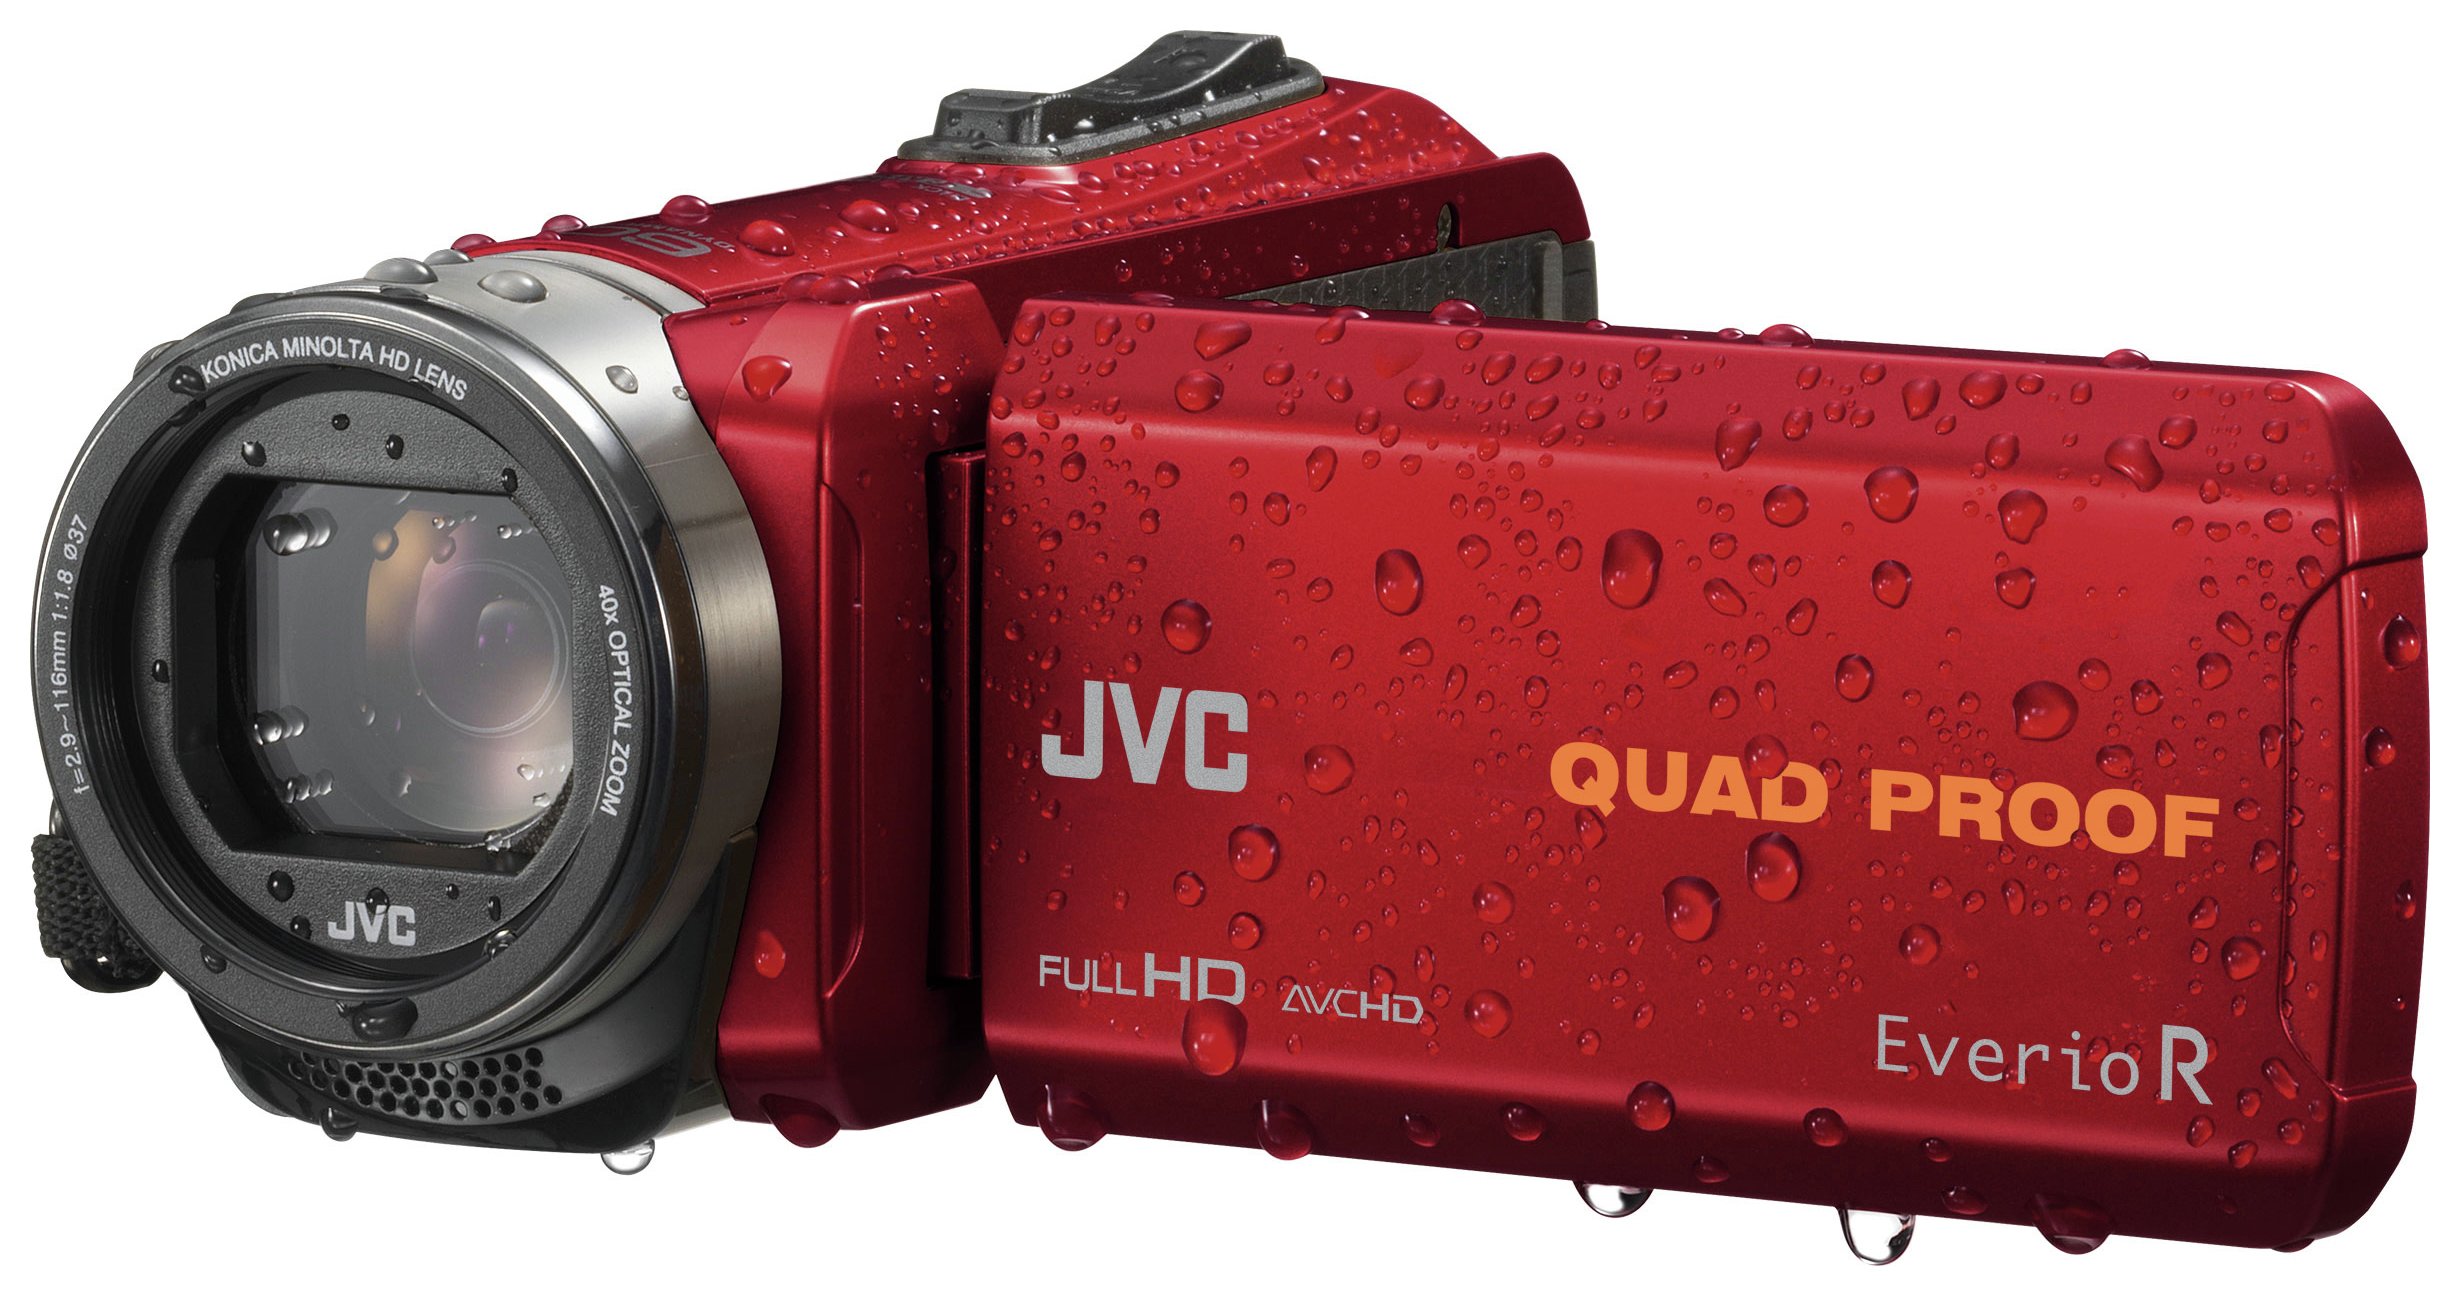 JVC GZ-R435 Full HD Camcorder Review